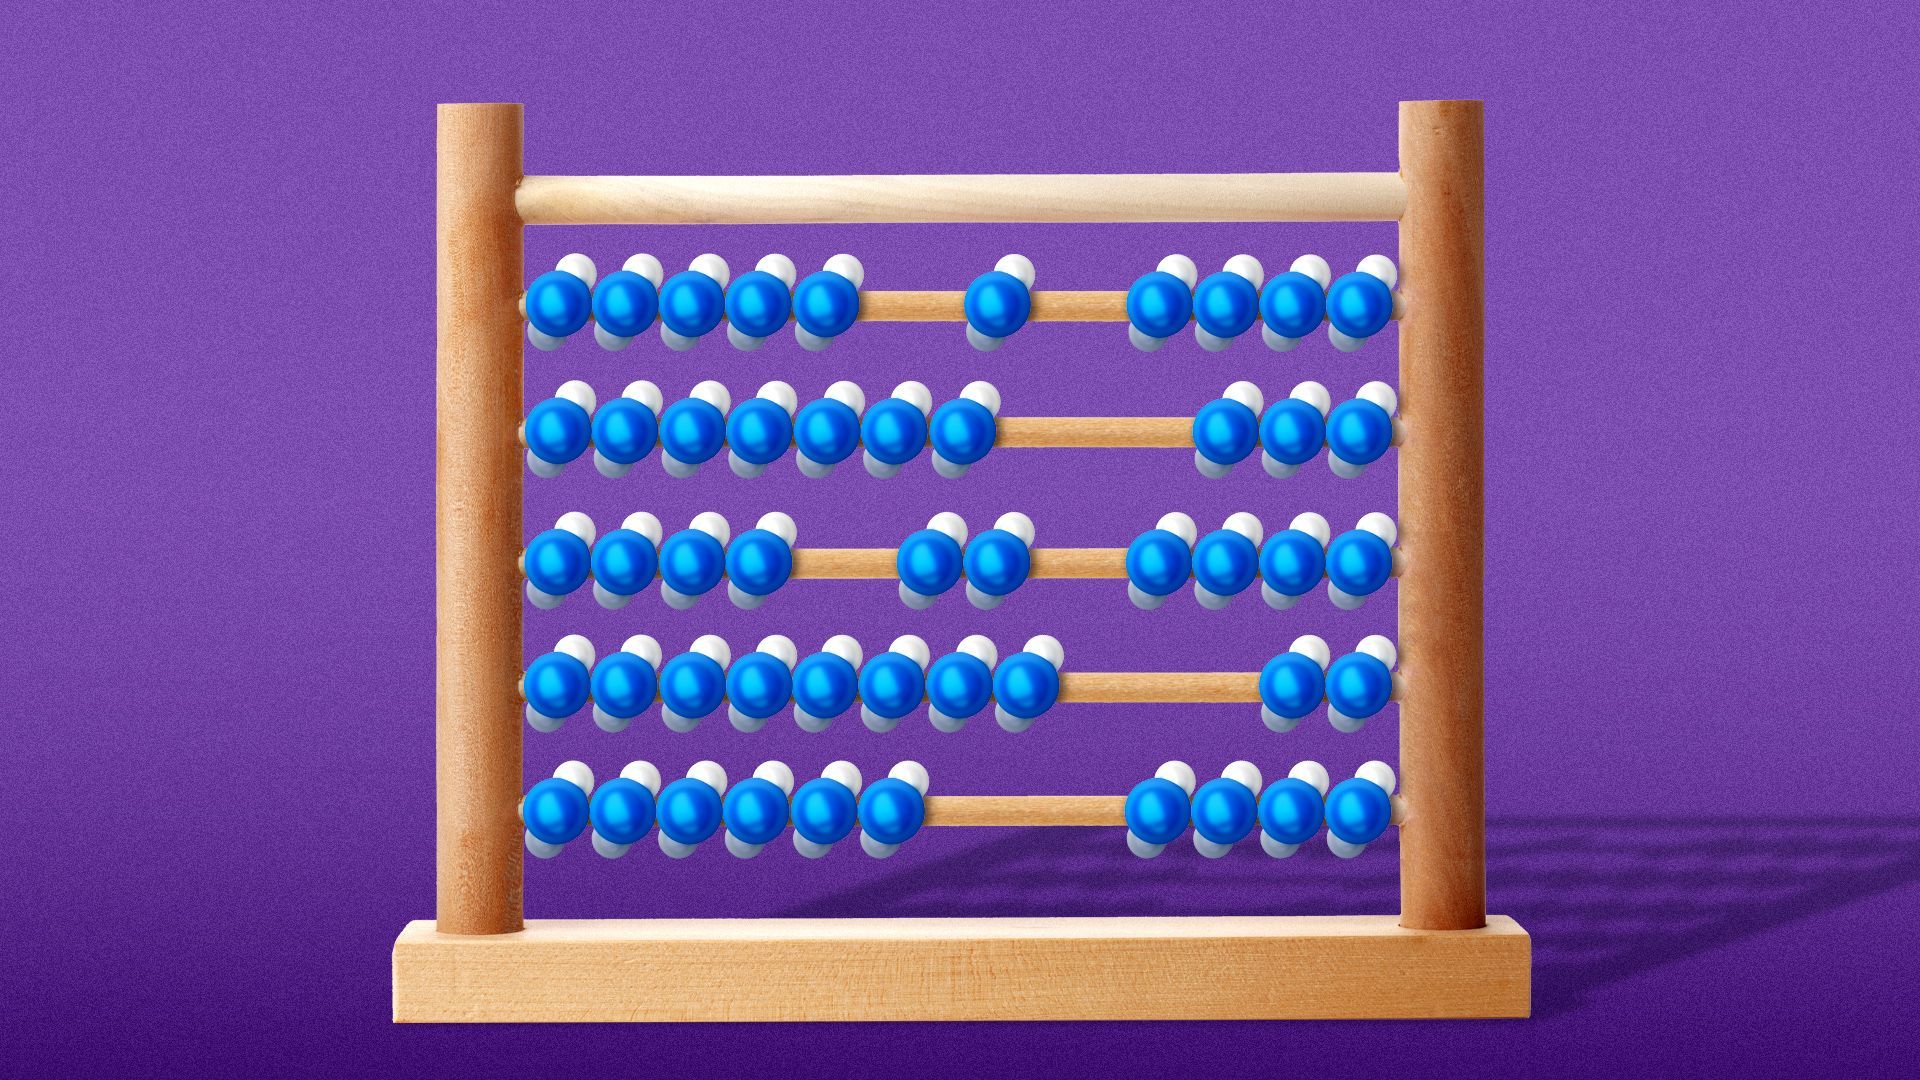 Illustration of an abacus with beads made from CO2 molecules.